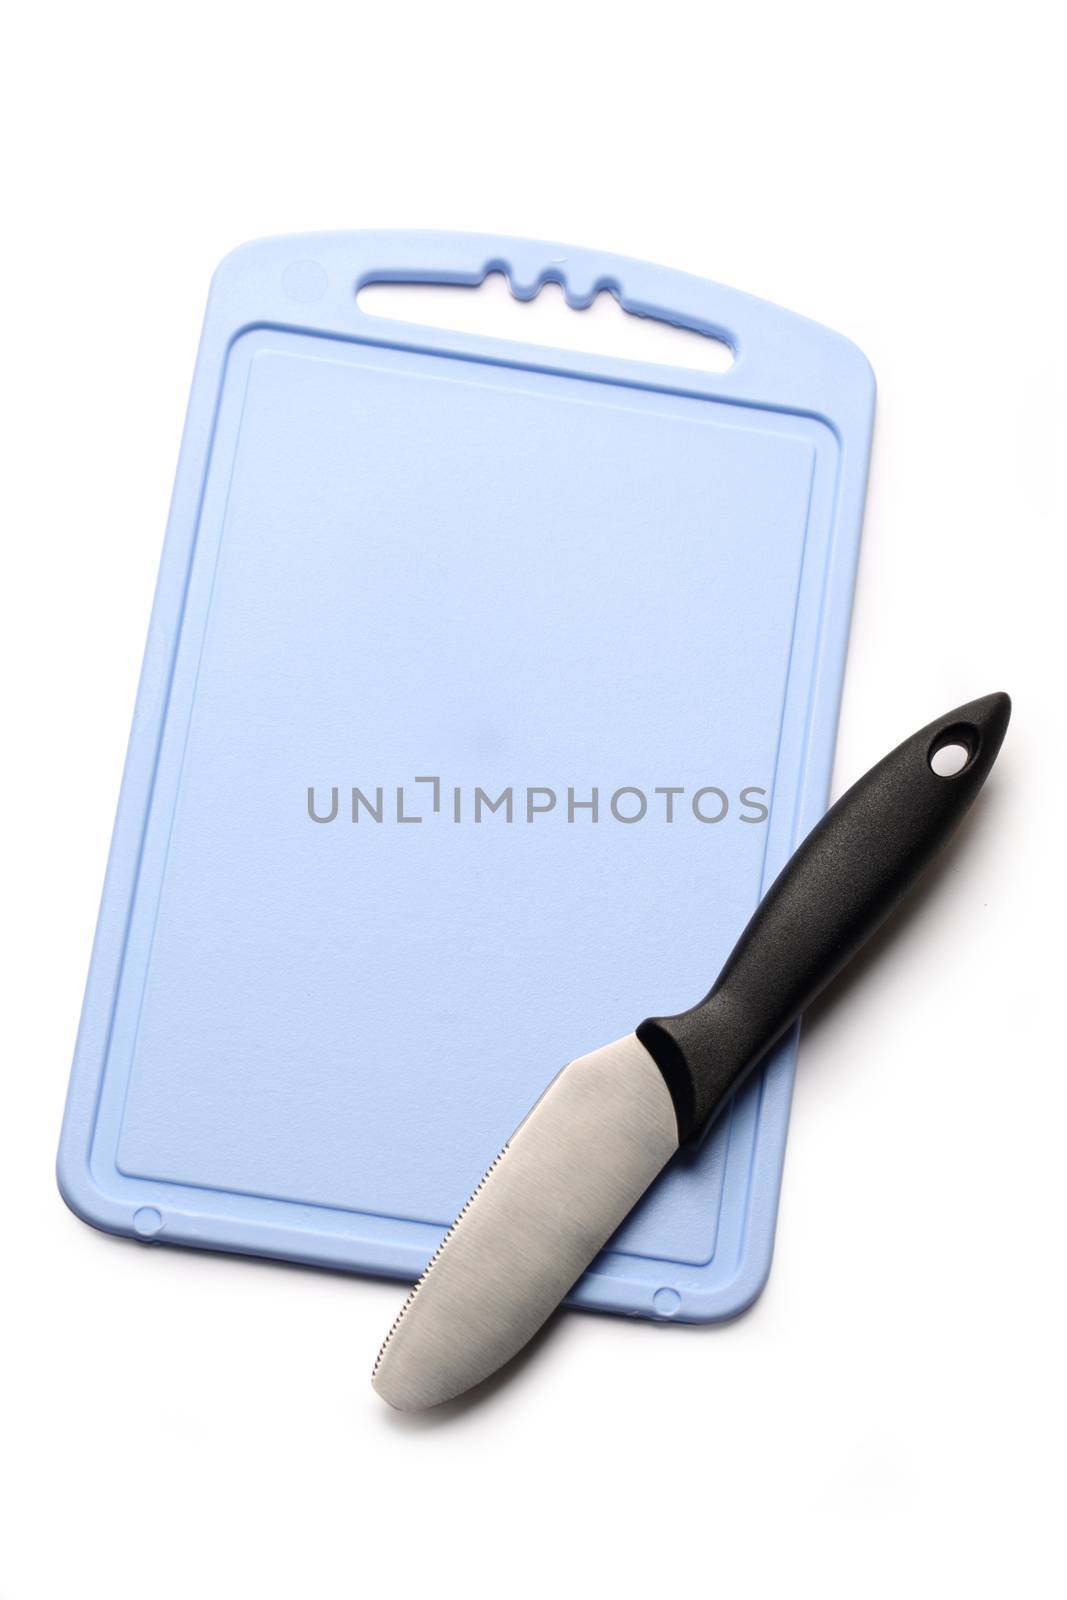 Kitchen knife and preparation board